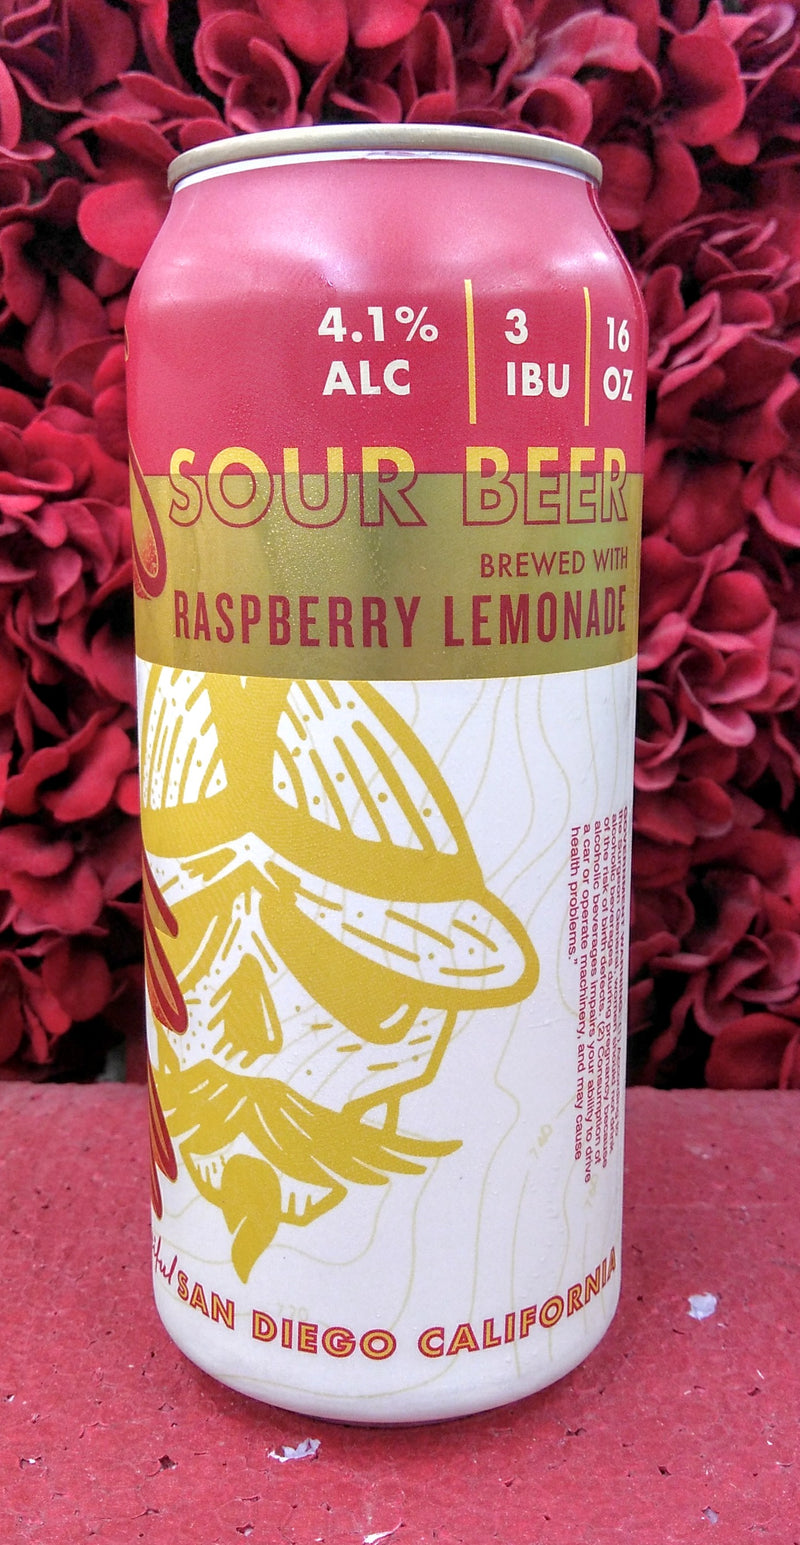 32 NORTH BREWING CO. LANDFALL RASPBERRY LEMONADE BERLINER WEISSE SOUR ALE 16oz can